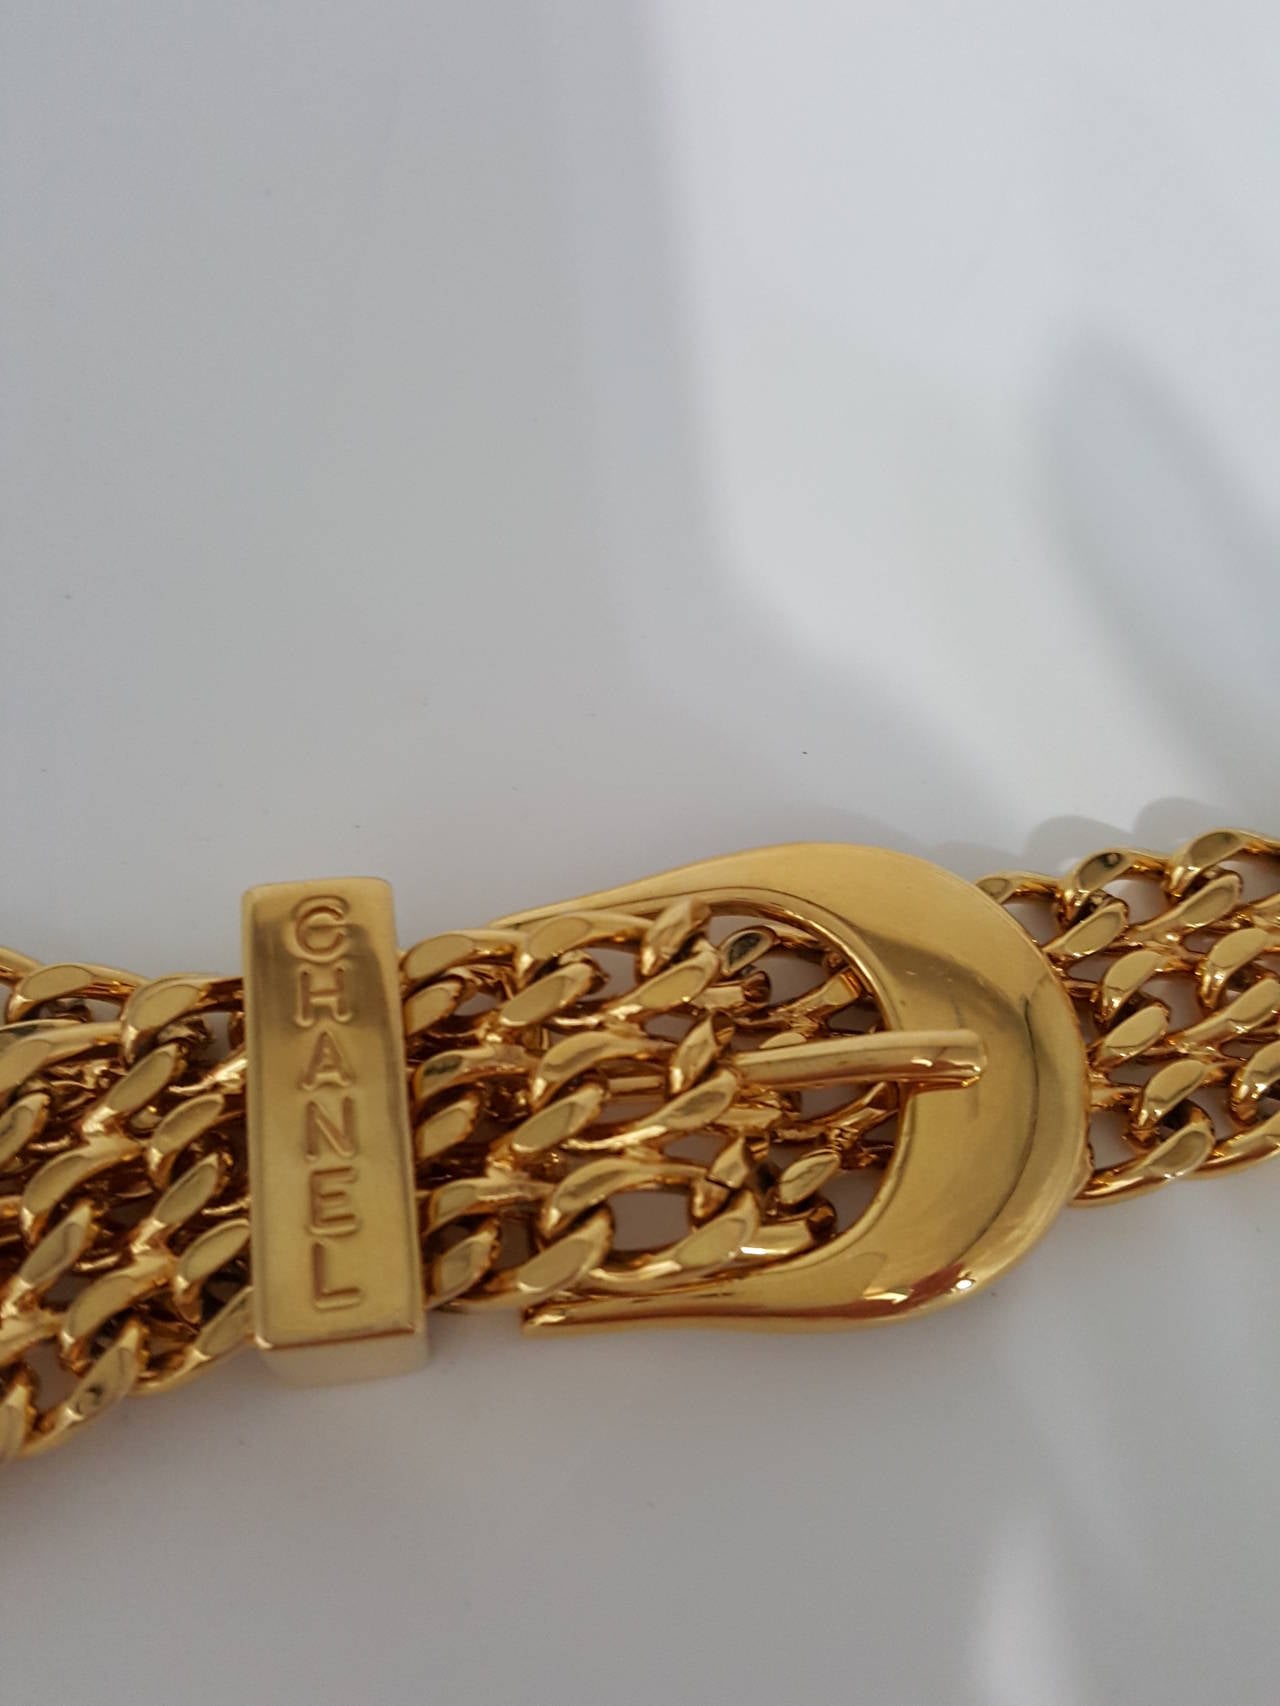 Brown Rare Chanel Woven Chain Belt/Necklace from 1997.